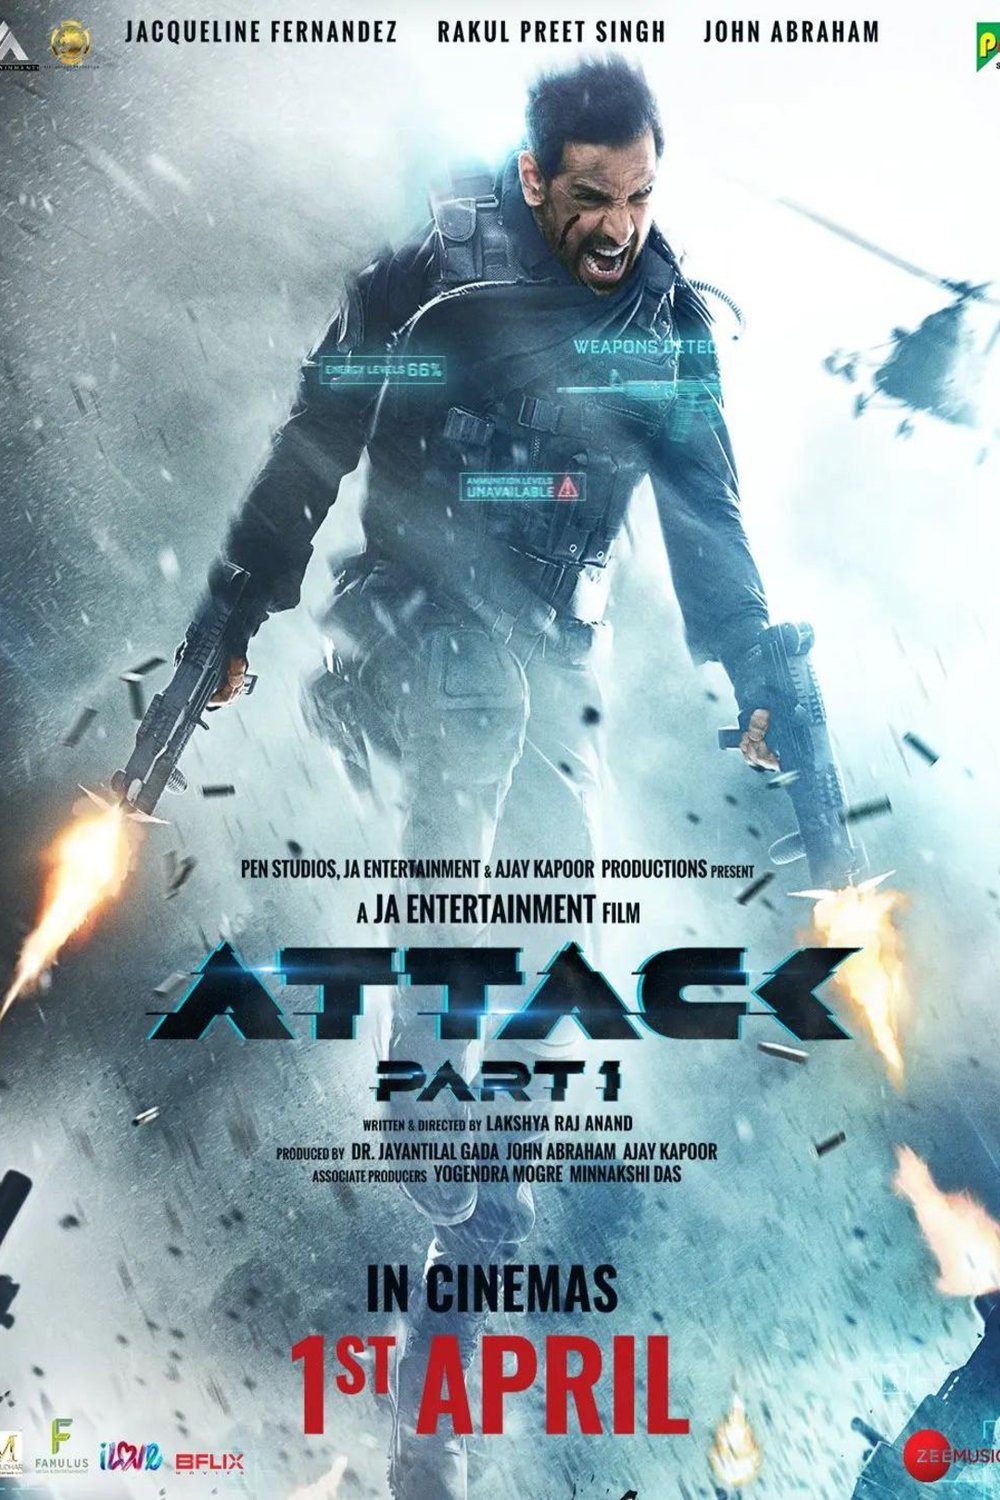 Hindi poster of the movie Attack